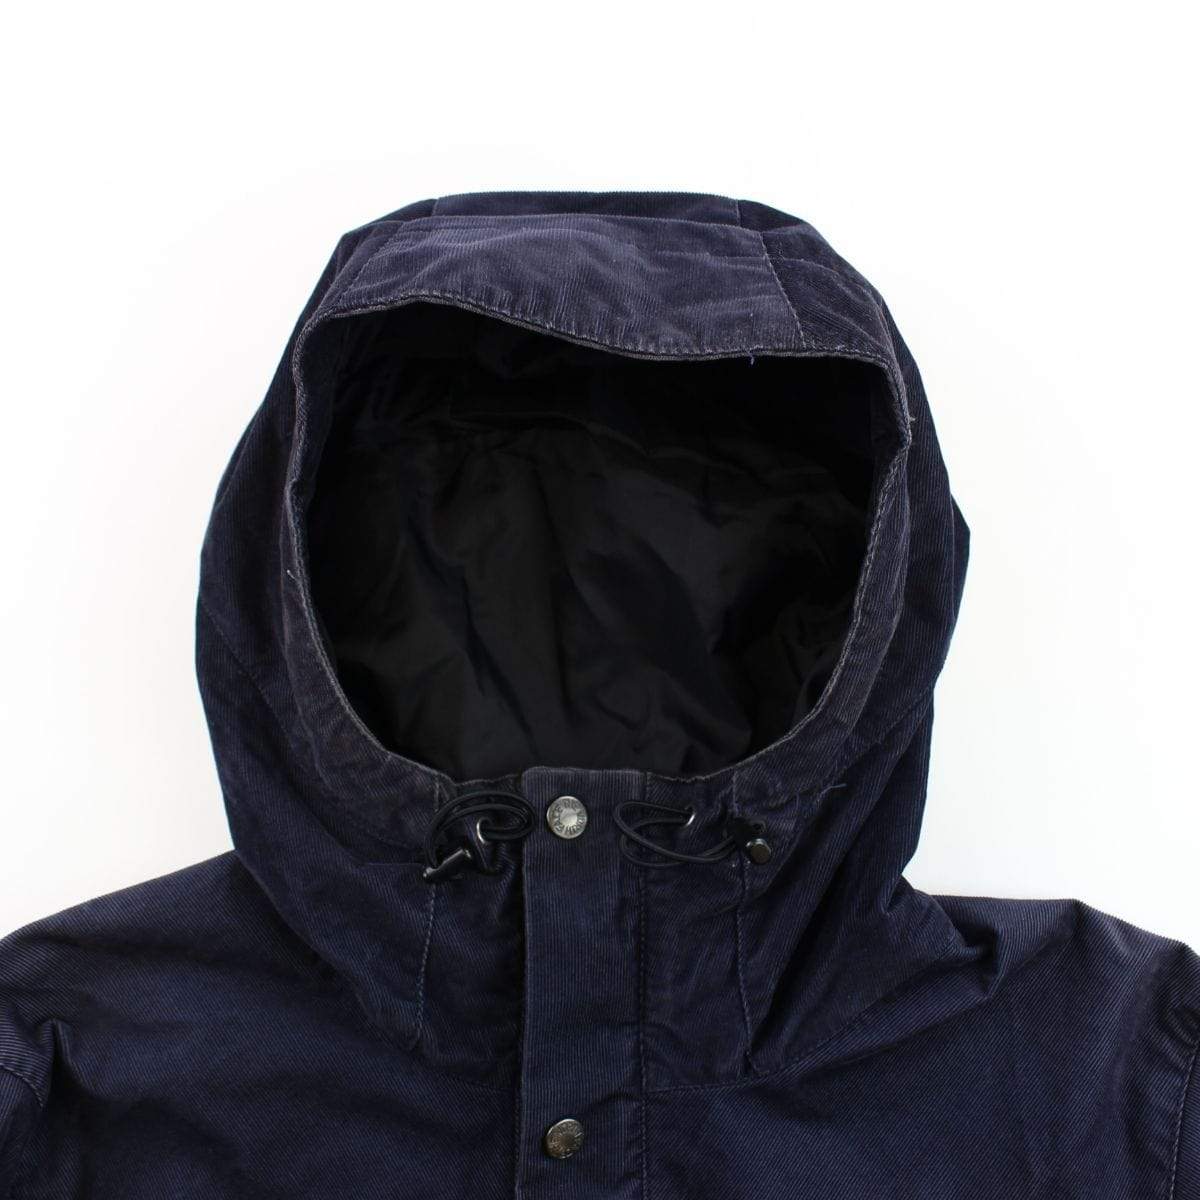 supreme x The North Face navy corduroy jacket 2012 - SaruGeneral